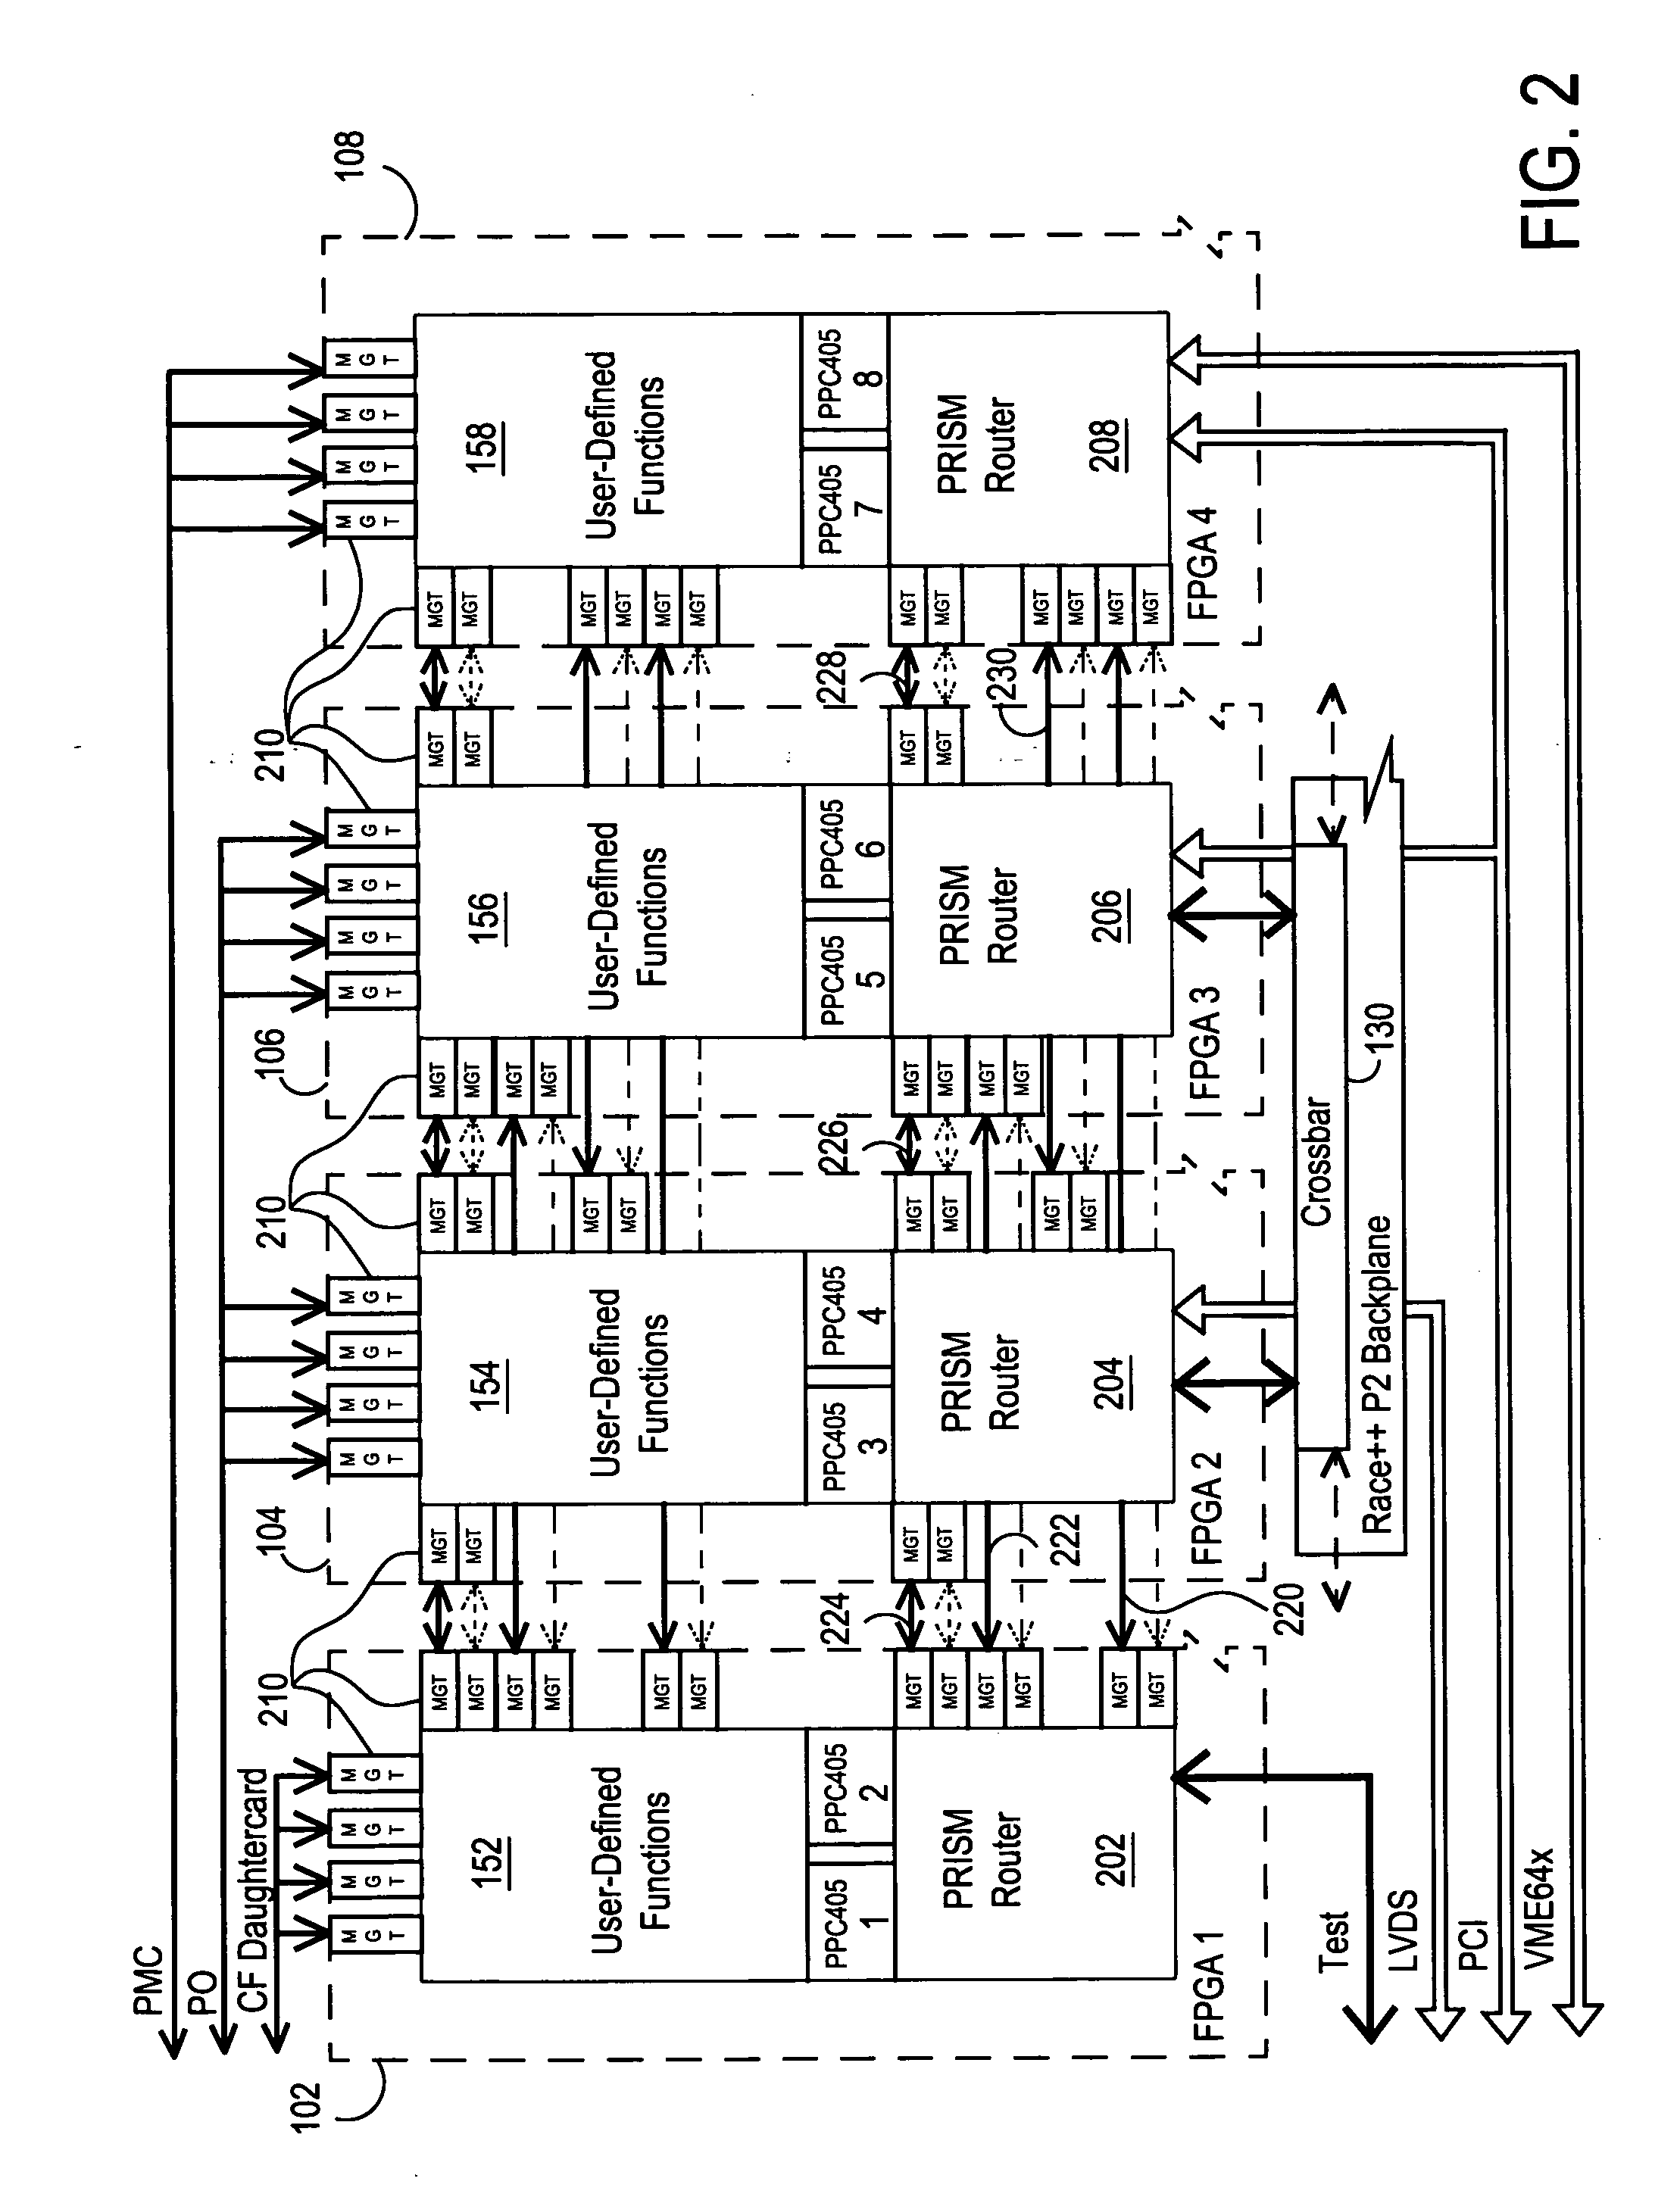 Systems and methods for interconnection of multiple FPGA devices